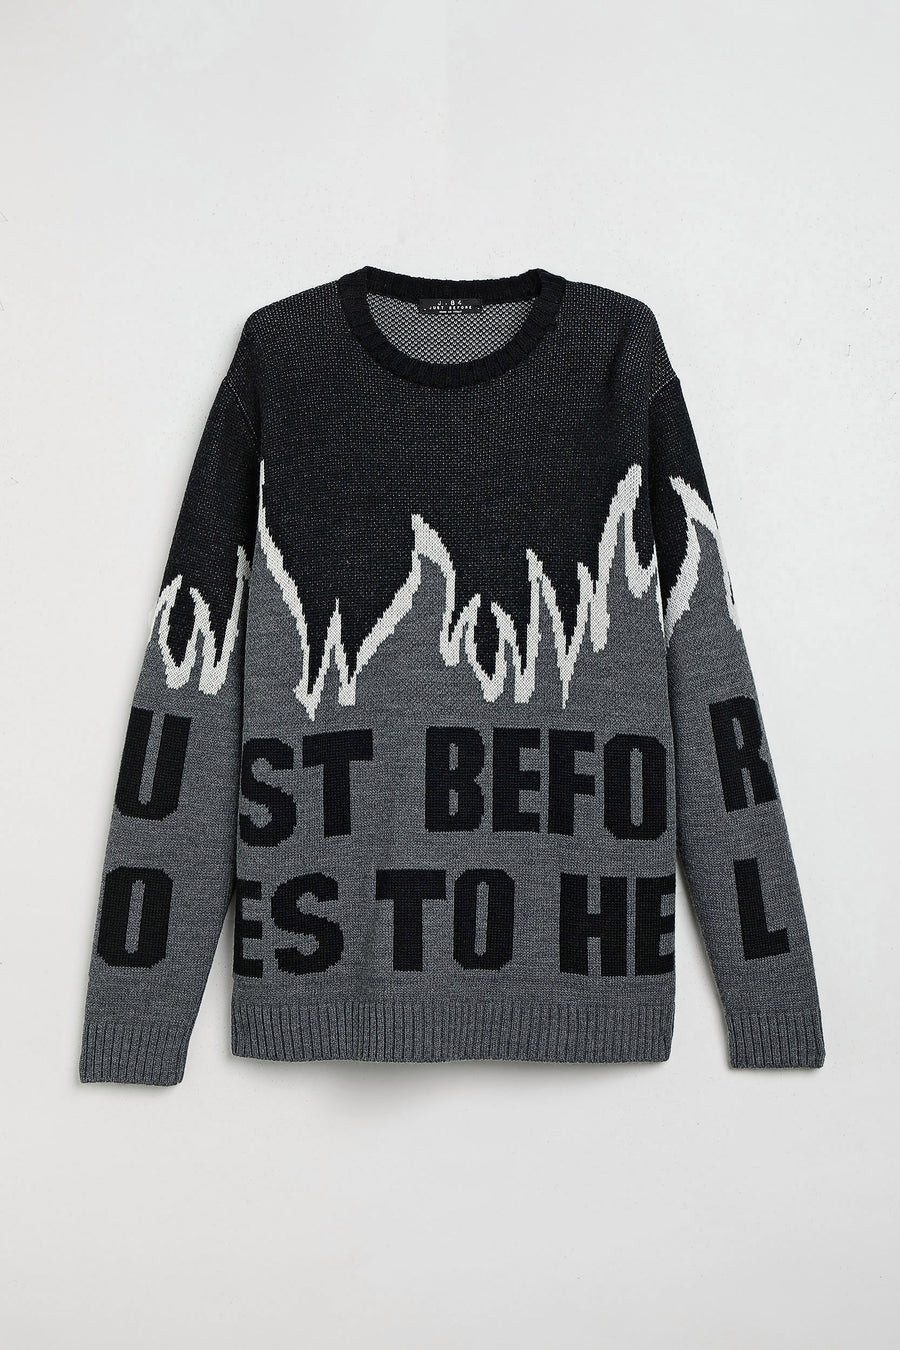 SWEATER WITH GRAY AND BLACK FLAMES DESIGN